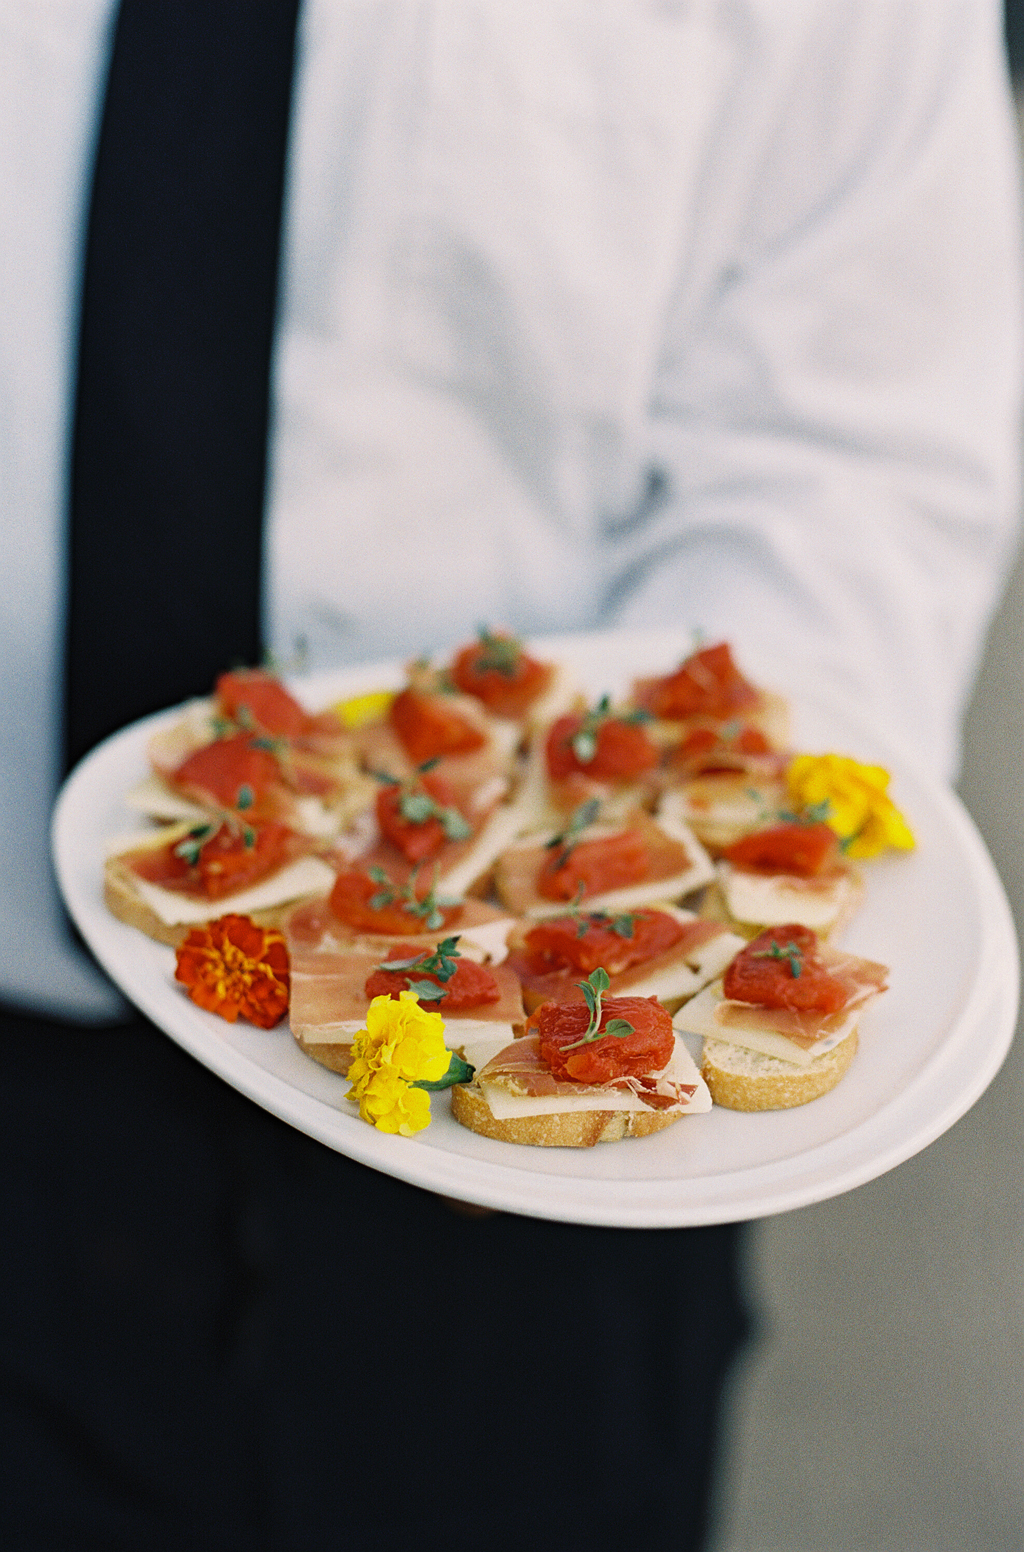 Culinary institute of america catering a wedding in Napa Valley by film photographer Michael Radford.